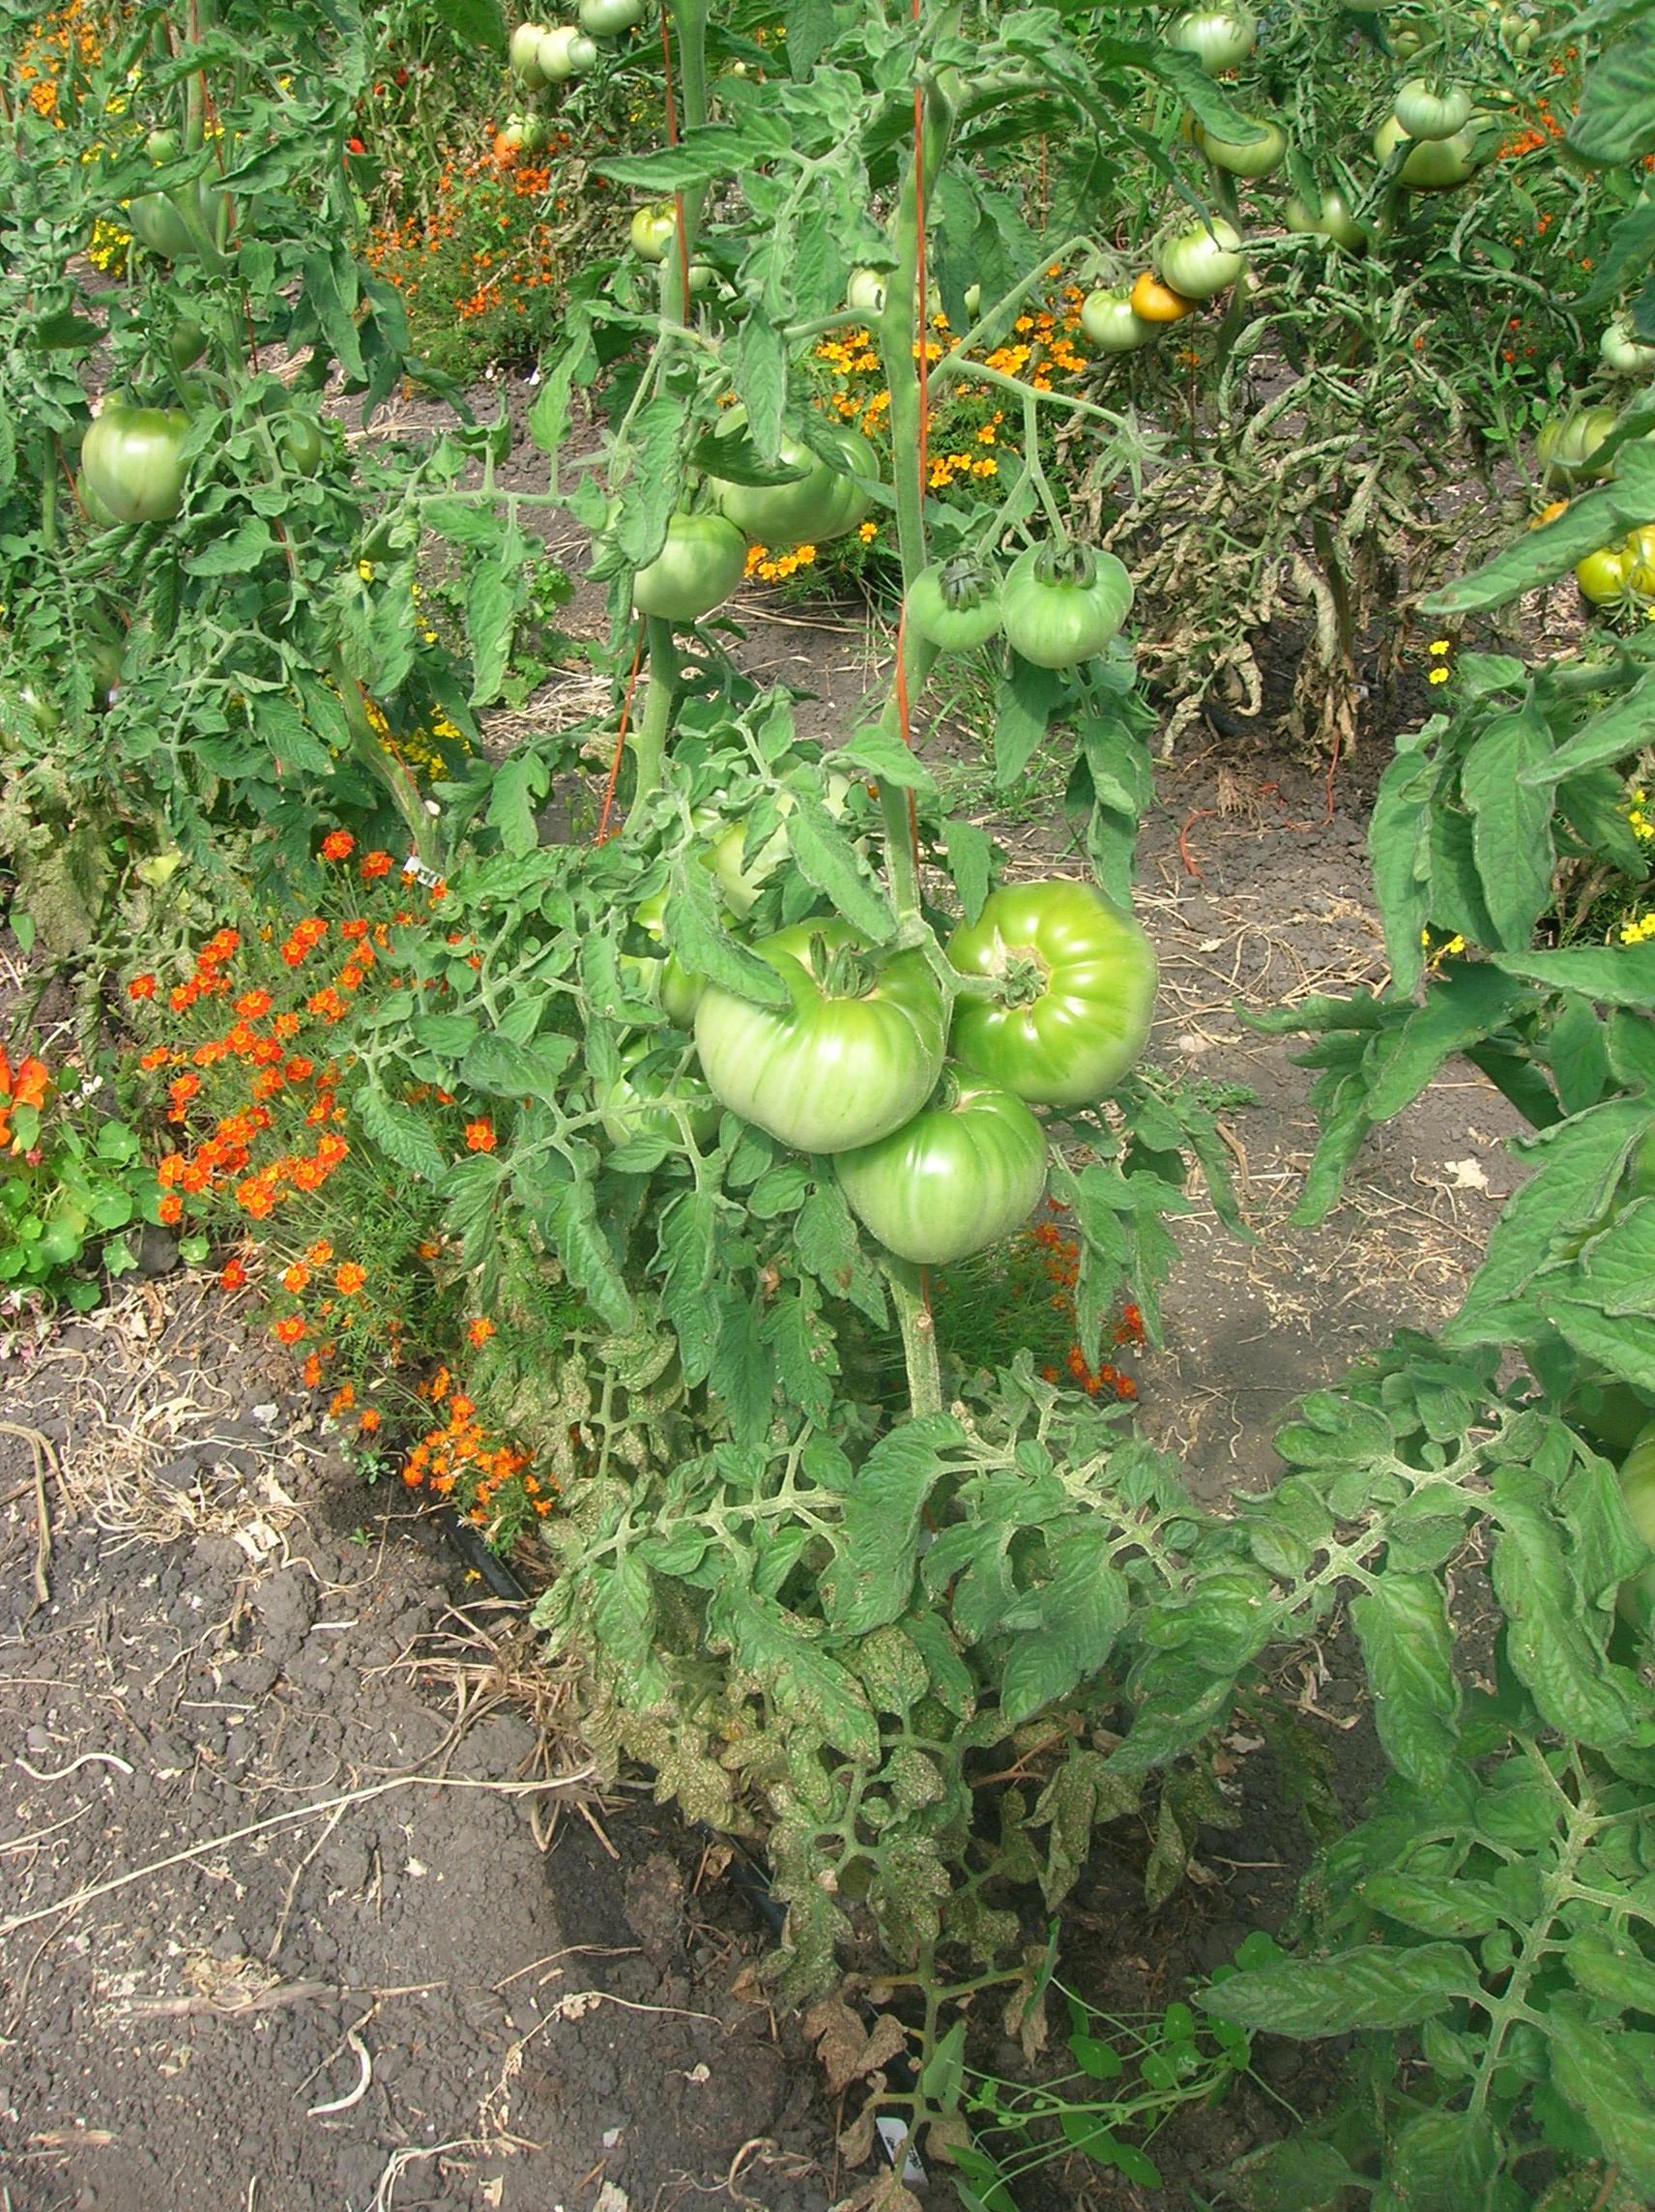 Healthy green tomatoes on the vine